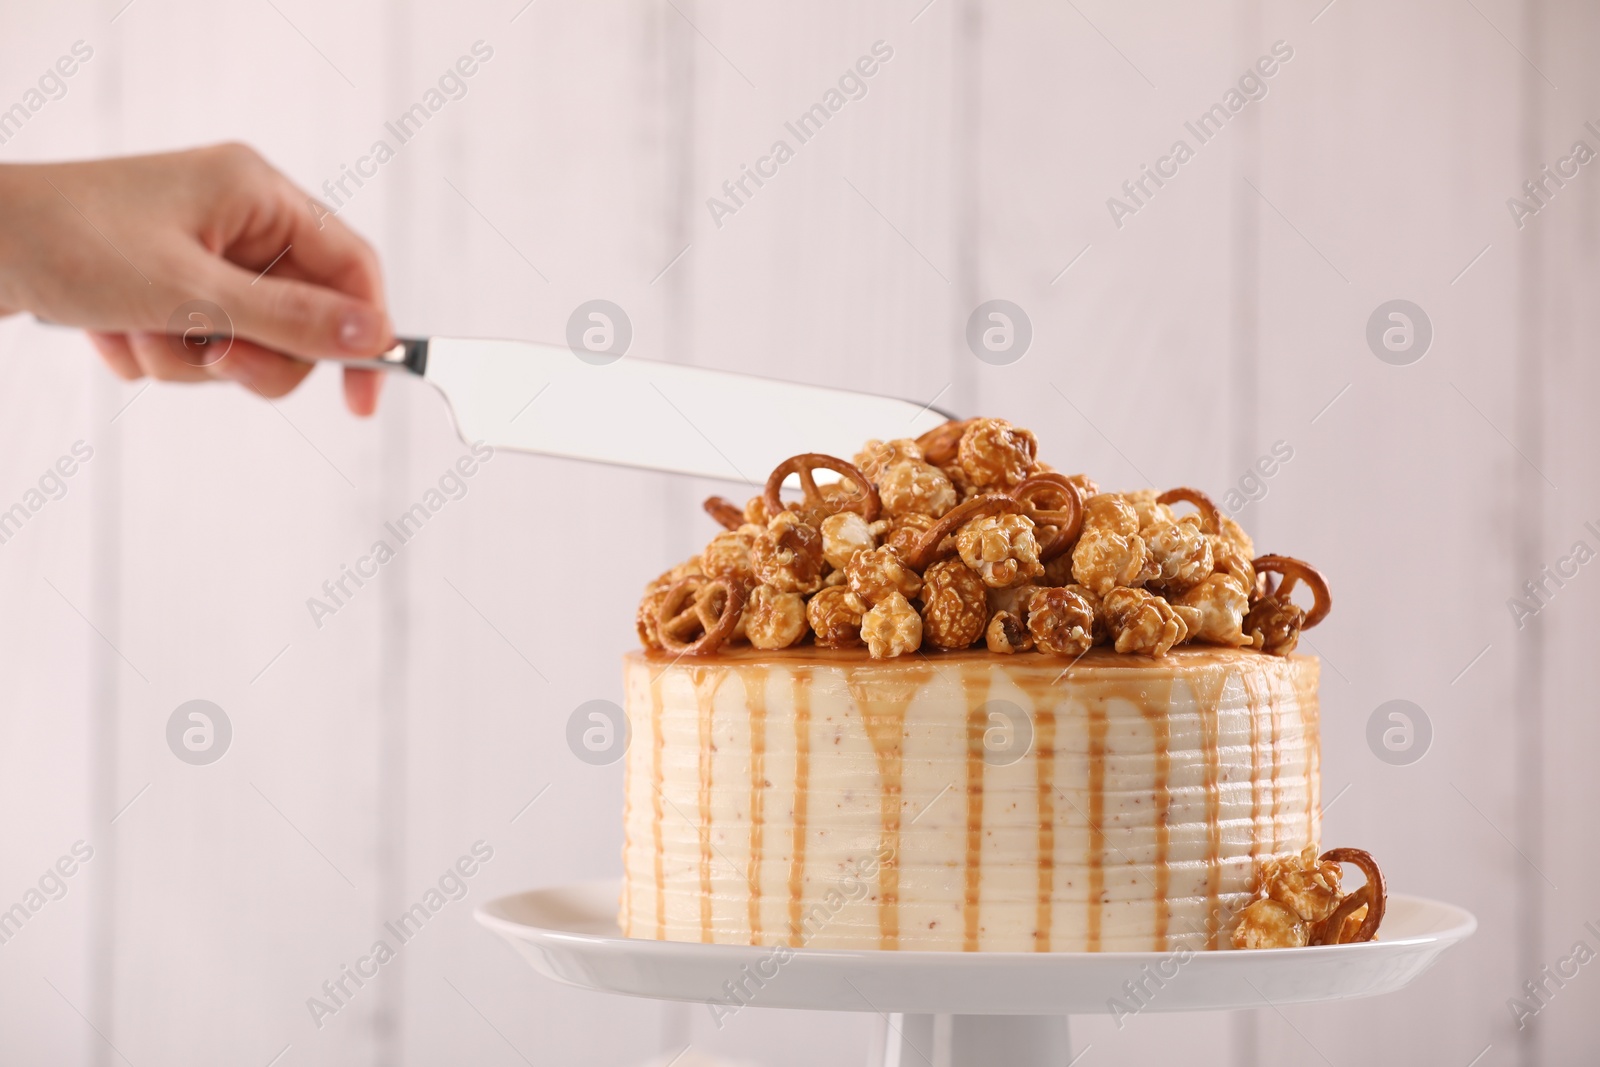 Photo of Woman cutting caramel drip cake decorated with popcorn and pretzels against light background, closeup